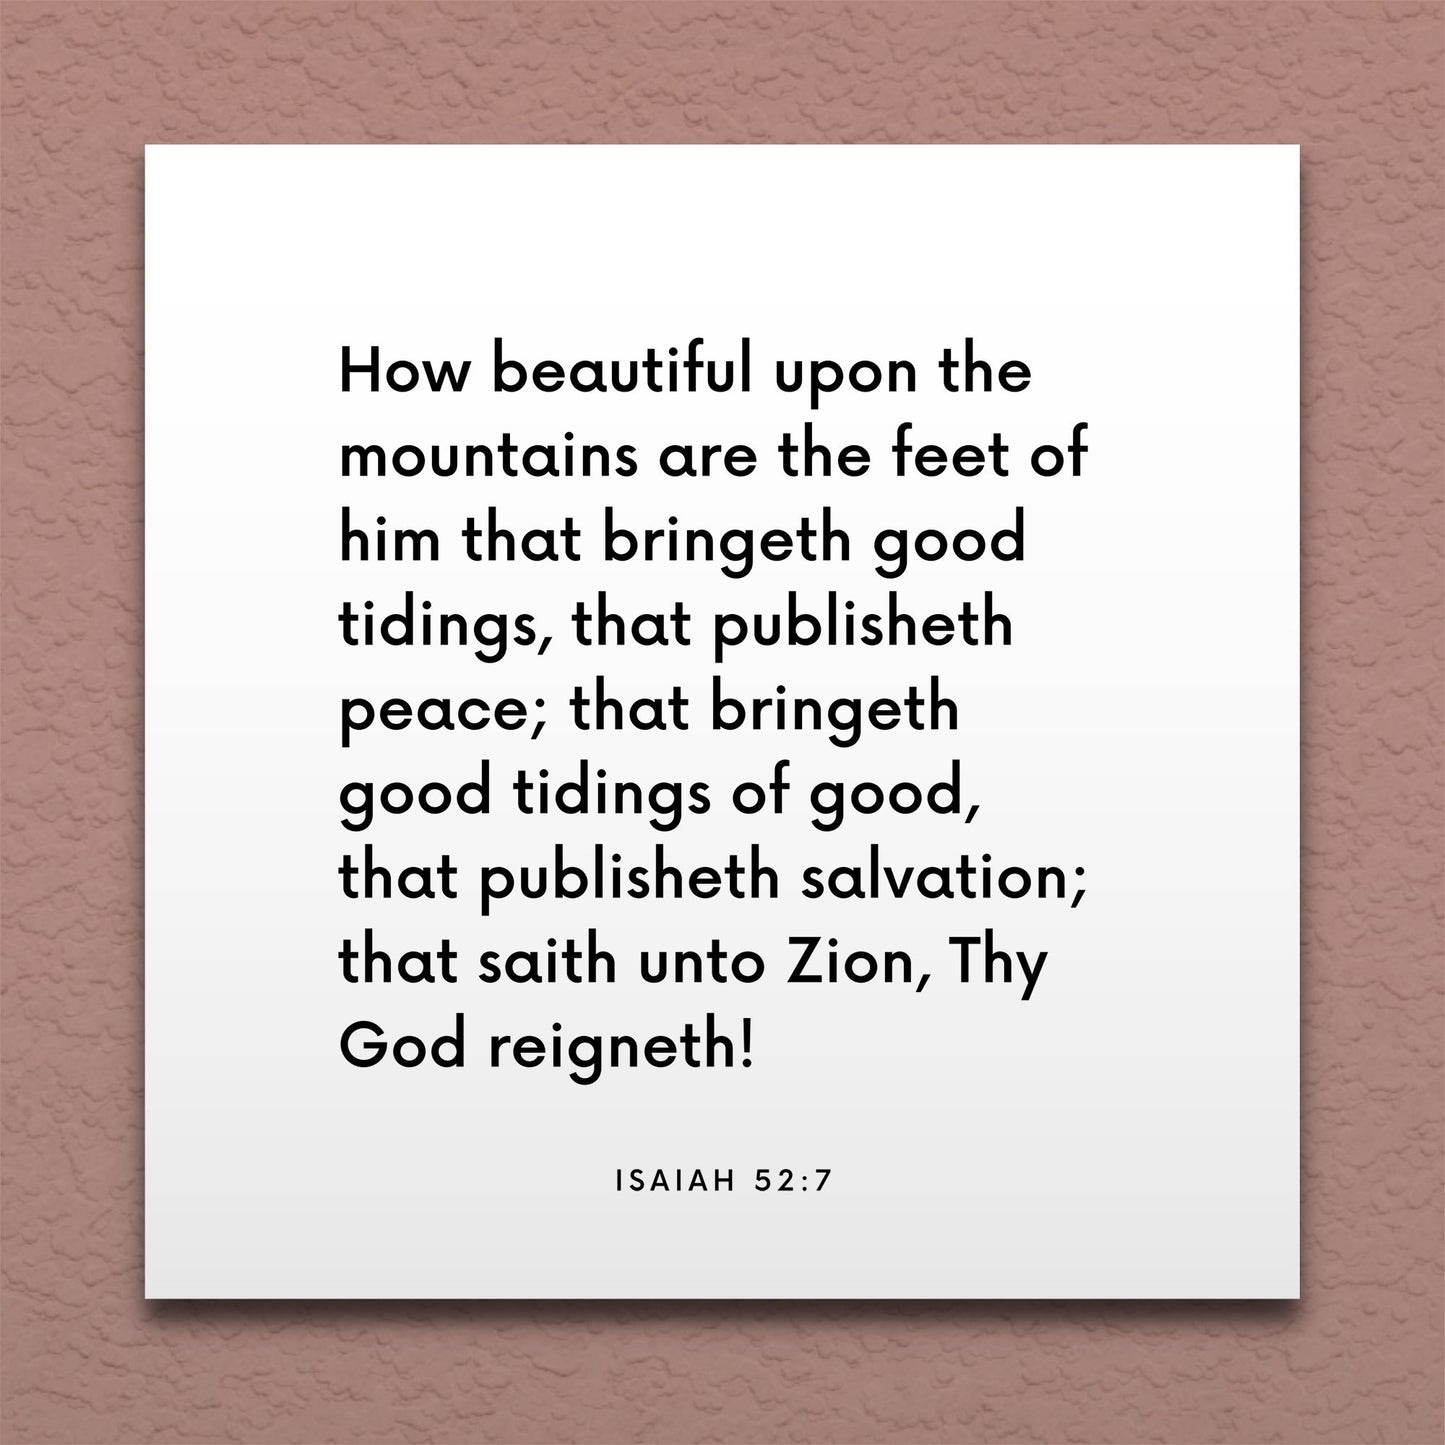 Wall-mounted scripture tile for Isaiah 52:7 - "How beautiful upon the mountains are the feet"